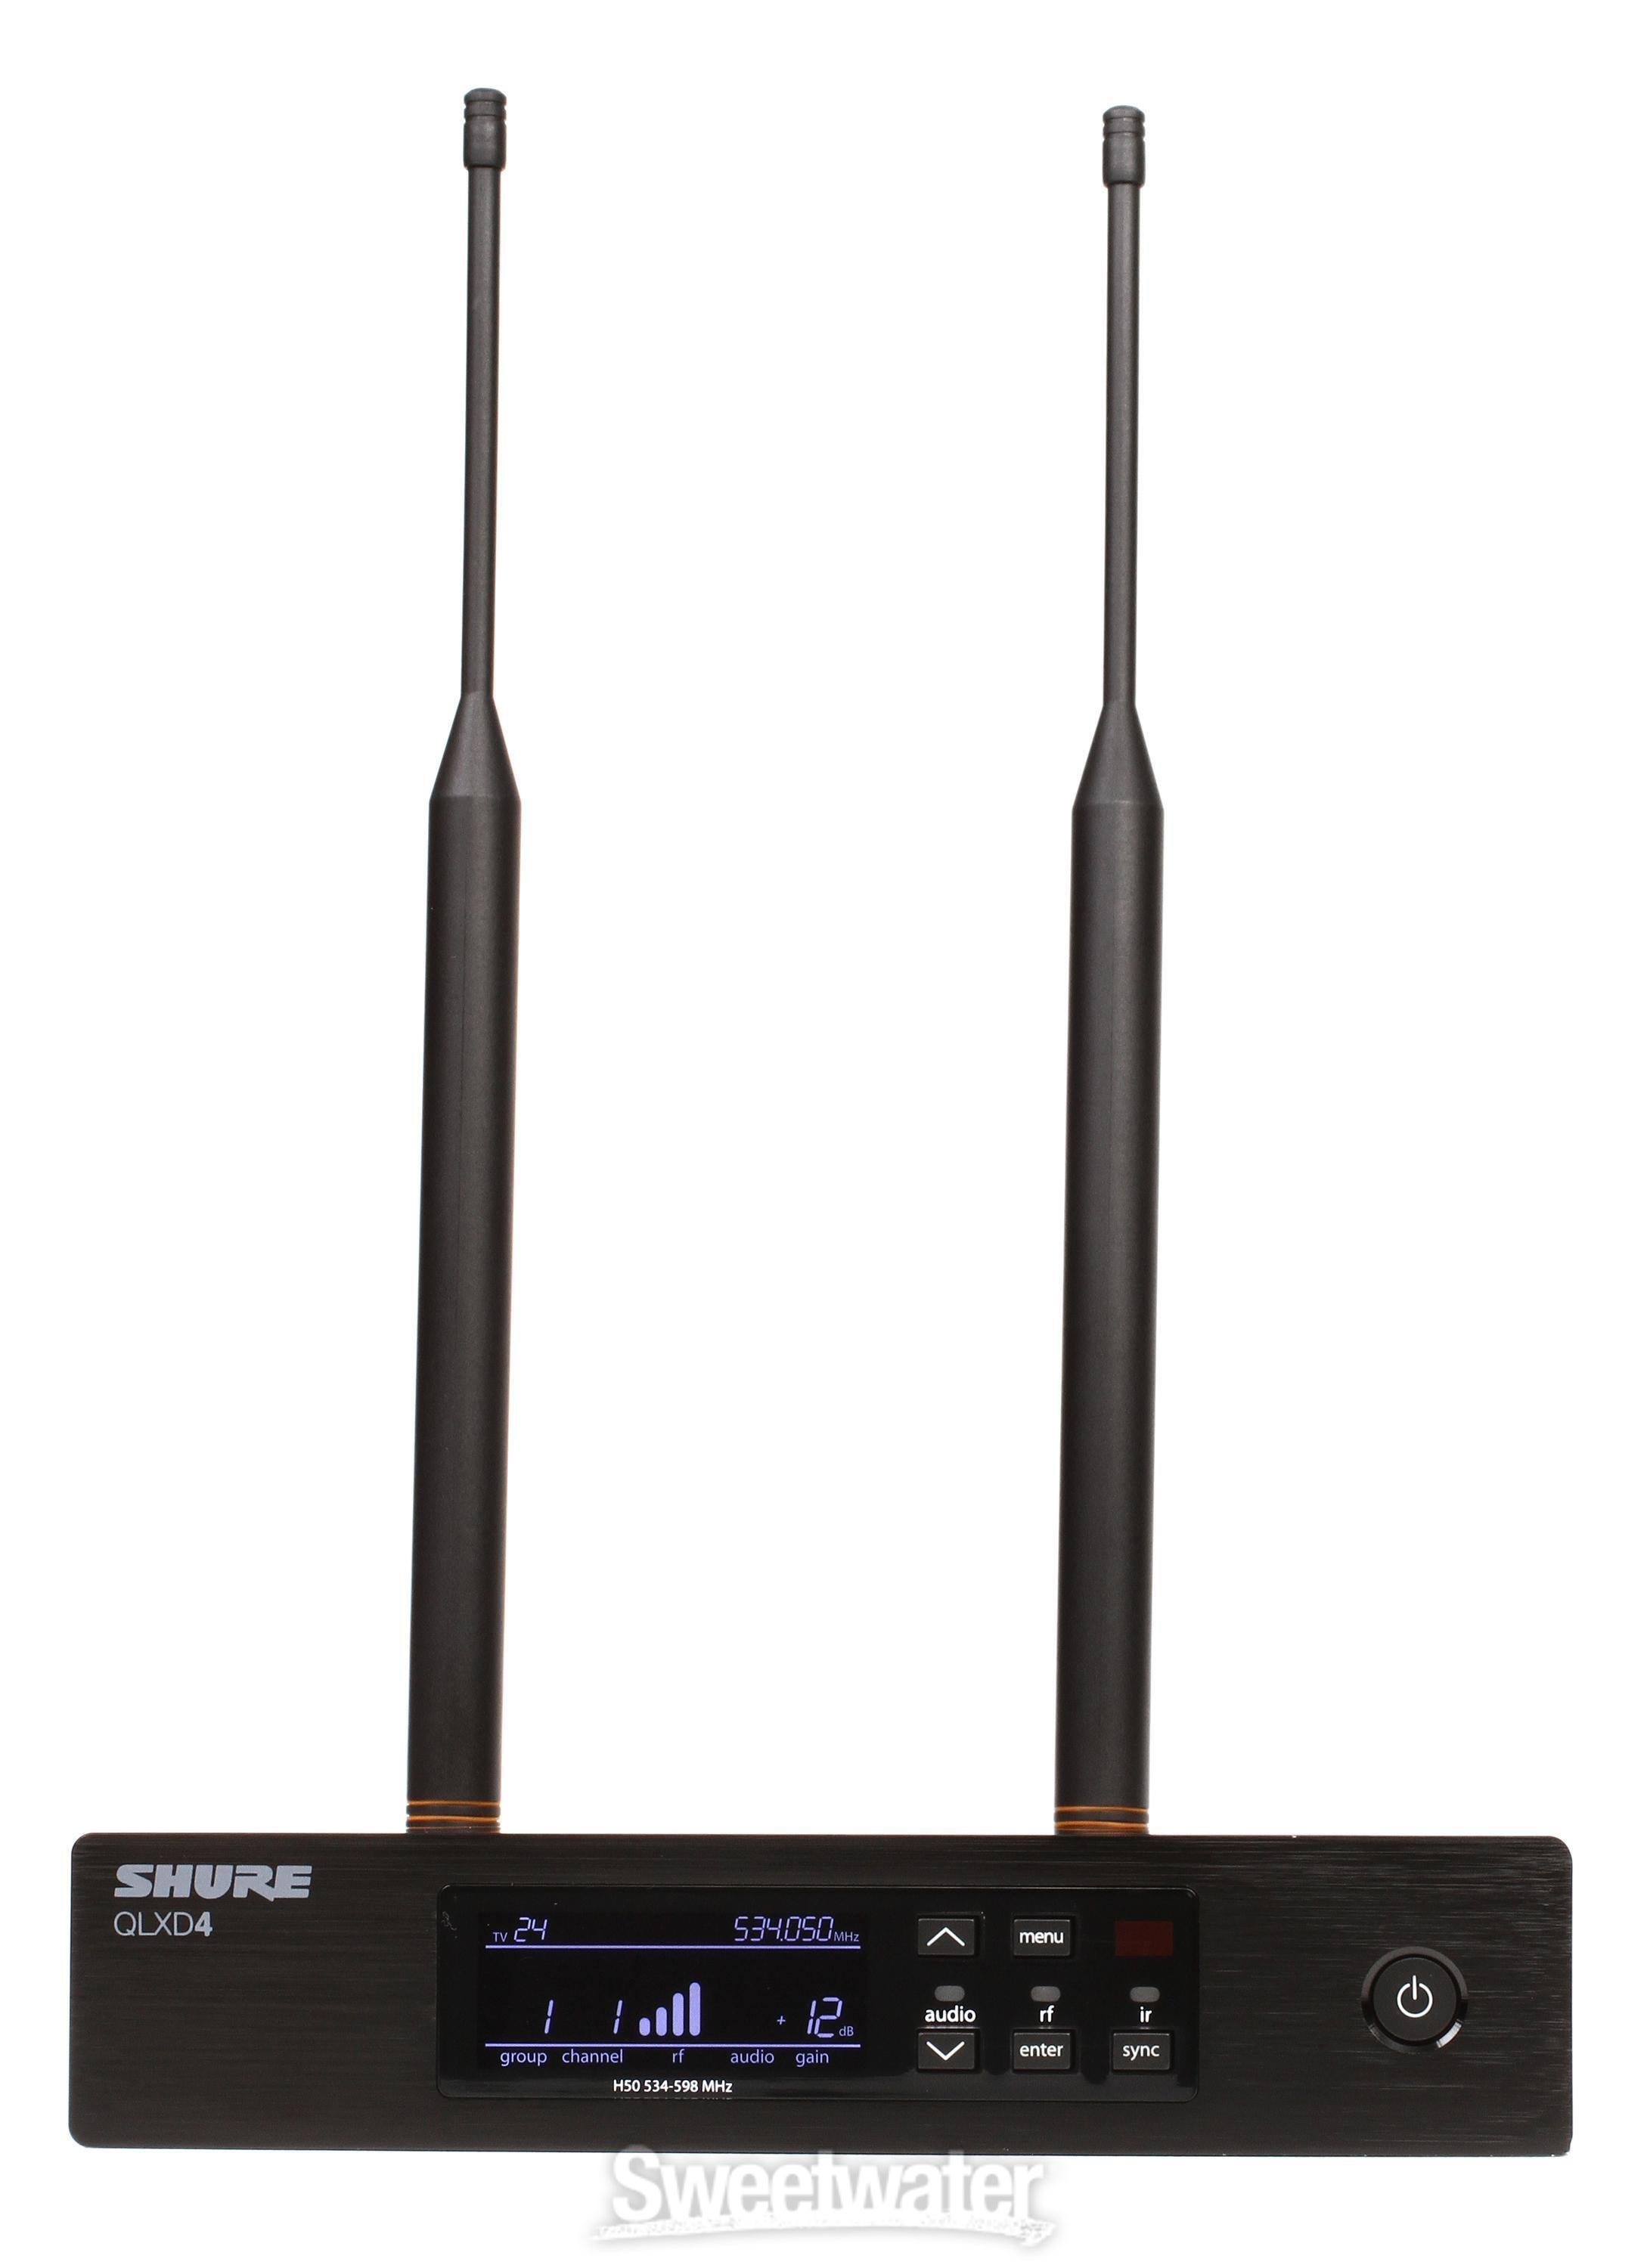 Shure QLXD14 Wireless Guitar System - H50 Band | Sweetwater